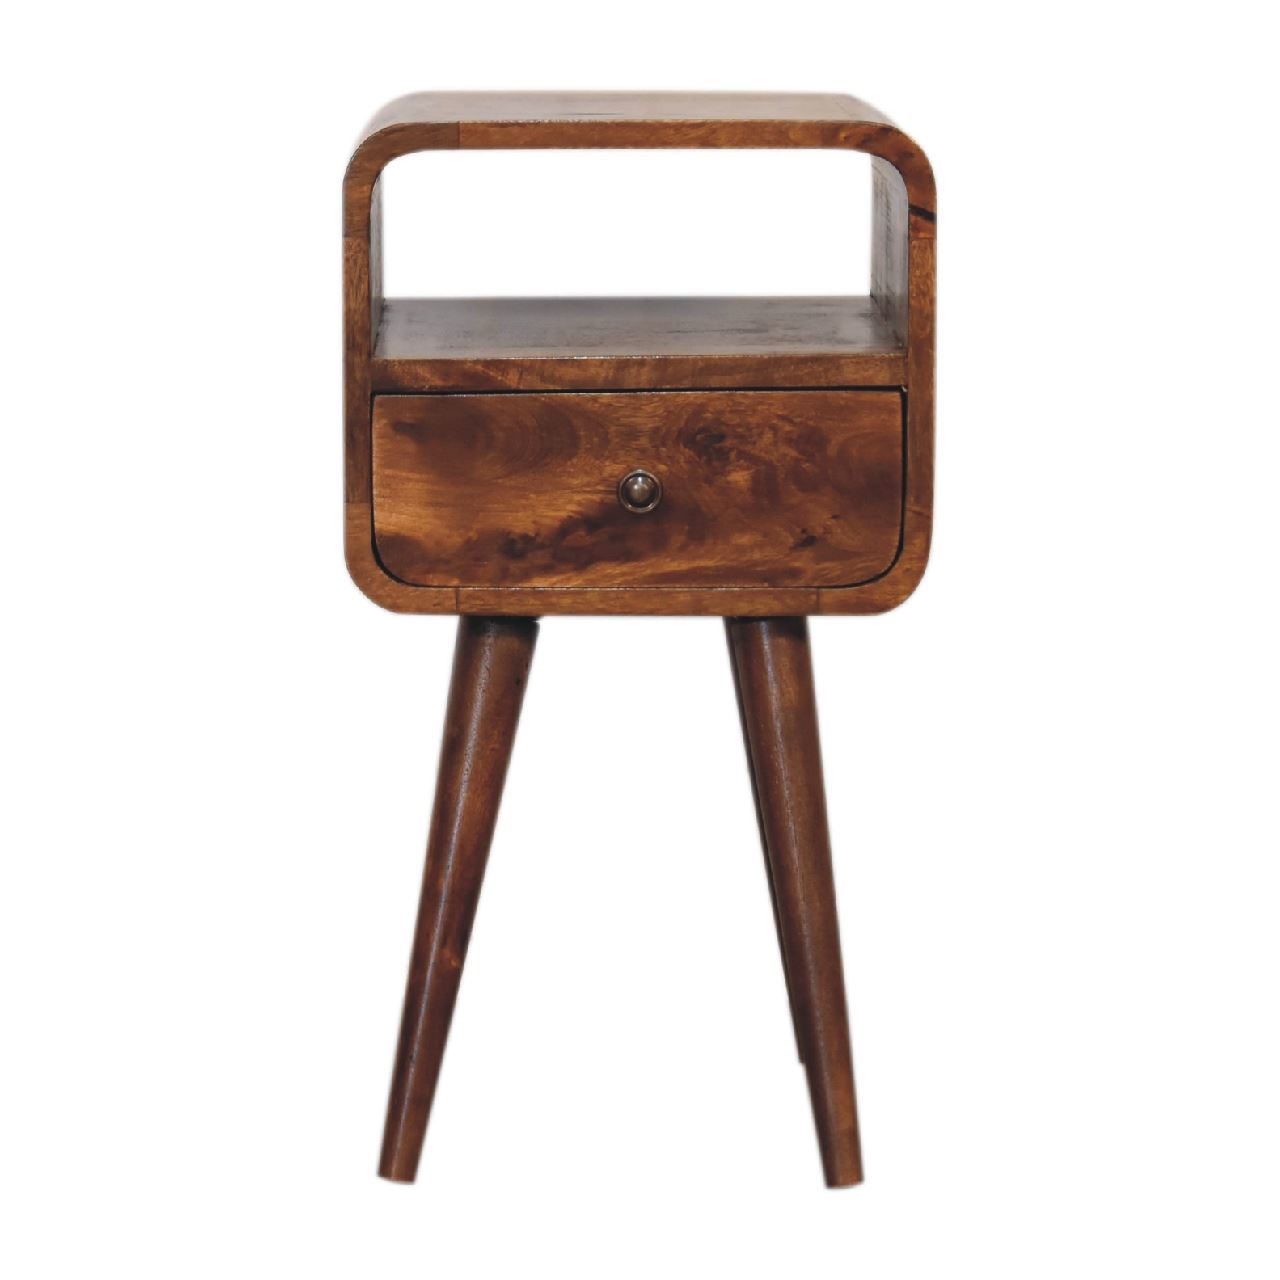 Artisan Mini Chestnut Curved Bedside Table with Open Slot